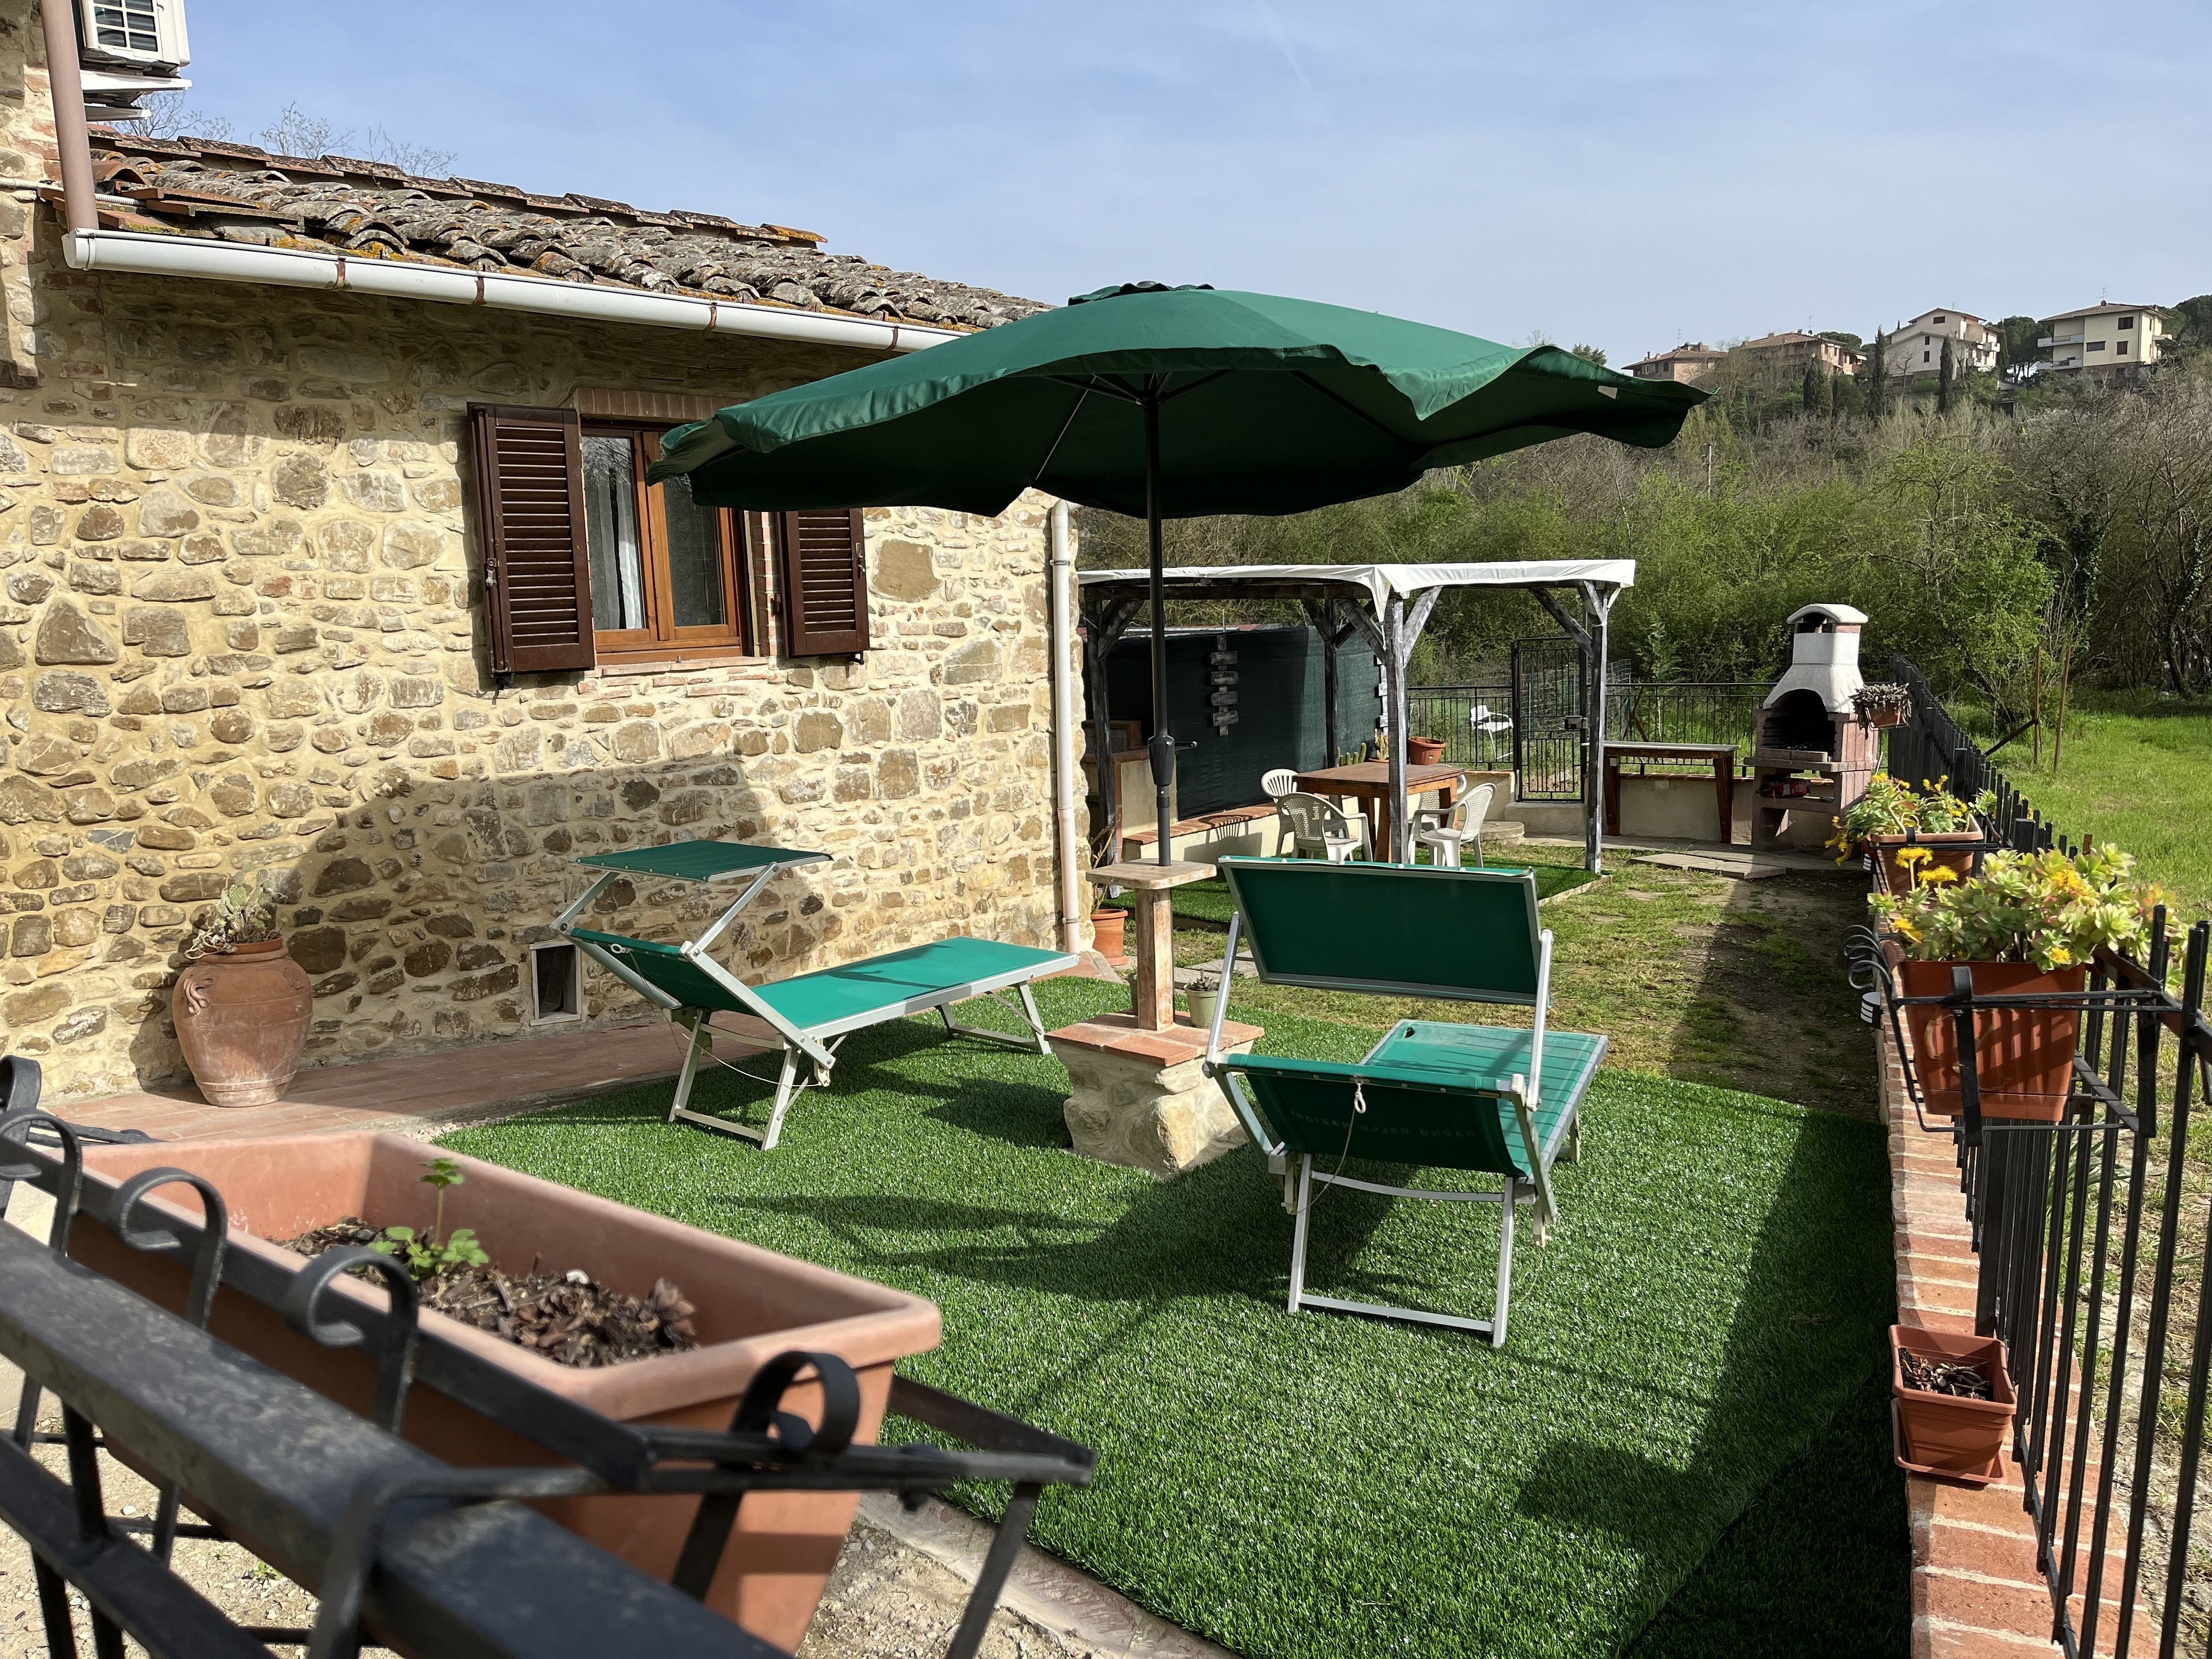 JWguest House at Zona Industriale, Toscana | Charming stone house in typical Tuscan style | Jwbnb no brobnb 3